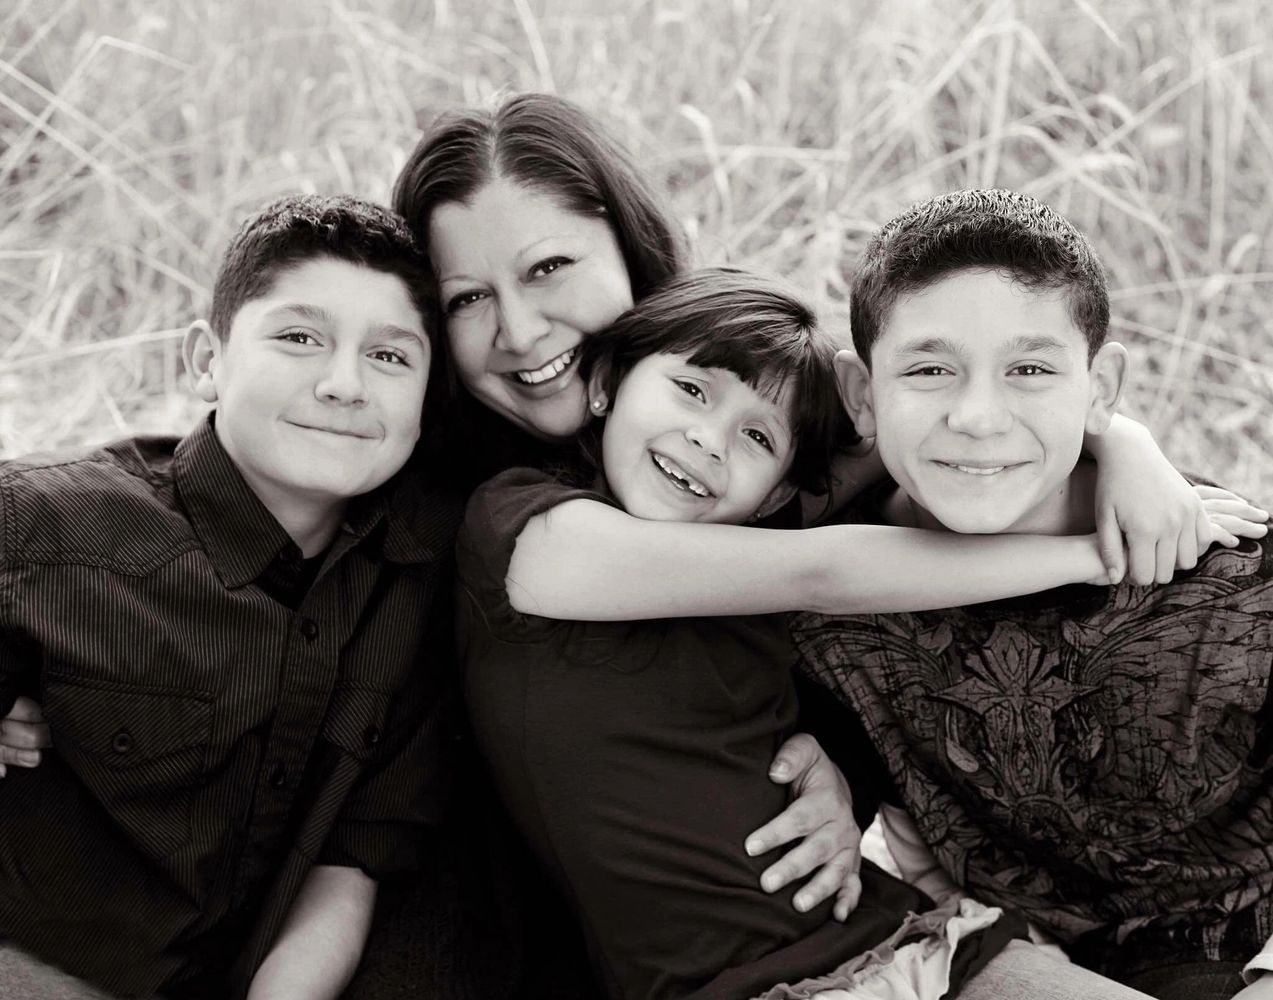 Delfina, founder of Be a Blessing with three of her children